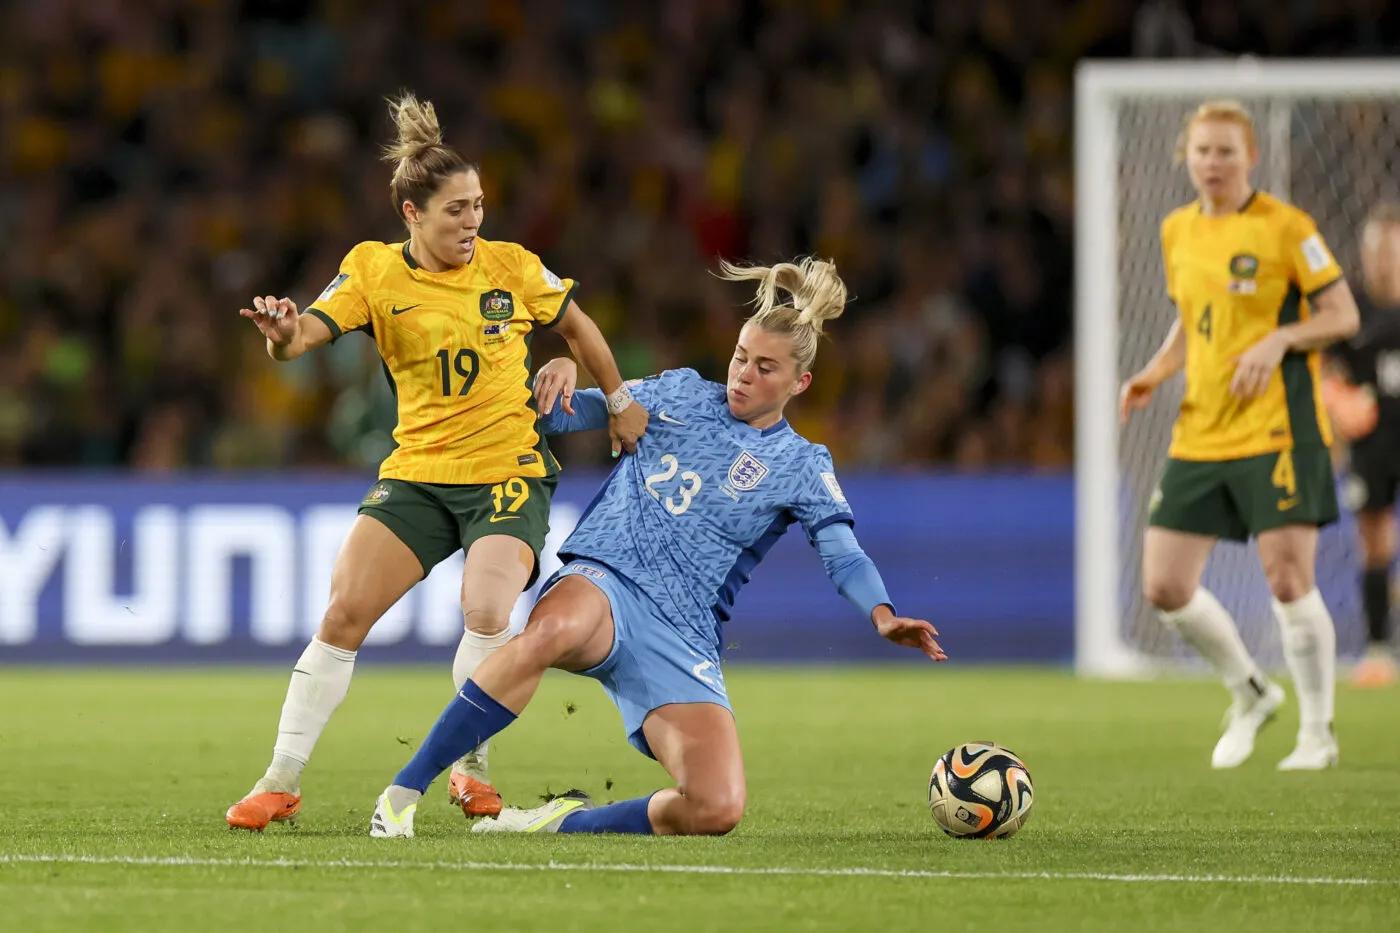 Sydney, Australien, 16.08.2023: Katrina Gorry (Australia) und Alessia Russo (England) im Kampf um den Ball waehrend des Spiels der Semi Final - FIFA Women's World Cup Australia &amp; New Zealand 2023 zwischen Australien und England im Stadion Australia am 16. August 2023 in Sydney, Australien. (Foto von Sajad Imanian/DeFodi Images) Sydney, Australia, 16.08.2023: Katrina Gorry (Australia) und Alessia Russo (England) battle for the ball during the Semi Final - FIFA Women's World Cup Australia &amp; New Zealand 2023 match between Australia vs England at Stadium Australia on August 16, 2023 in Sydney, Australia. (Photo by Sajad Imanian/DeFodi Images) Images cannot be used in books or individually in the form of mobile alert services or downloads without prior approval from FIFA - Photo by Icon sport